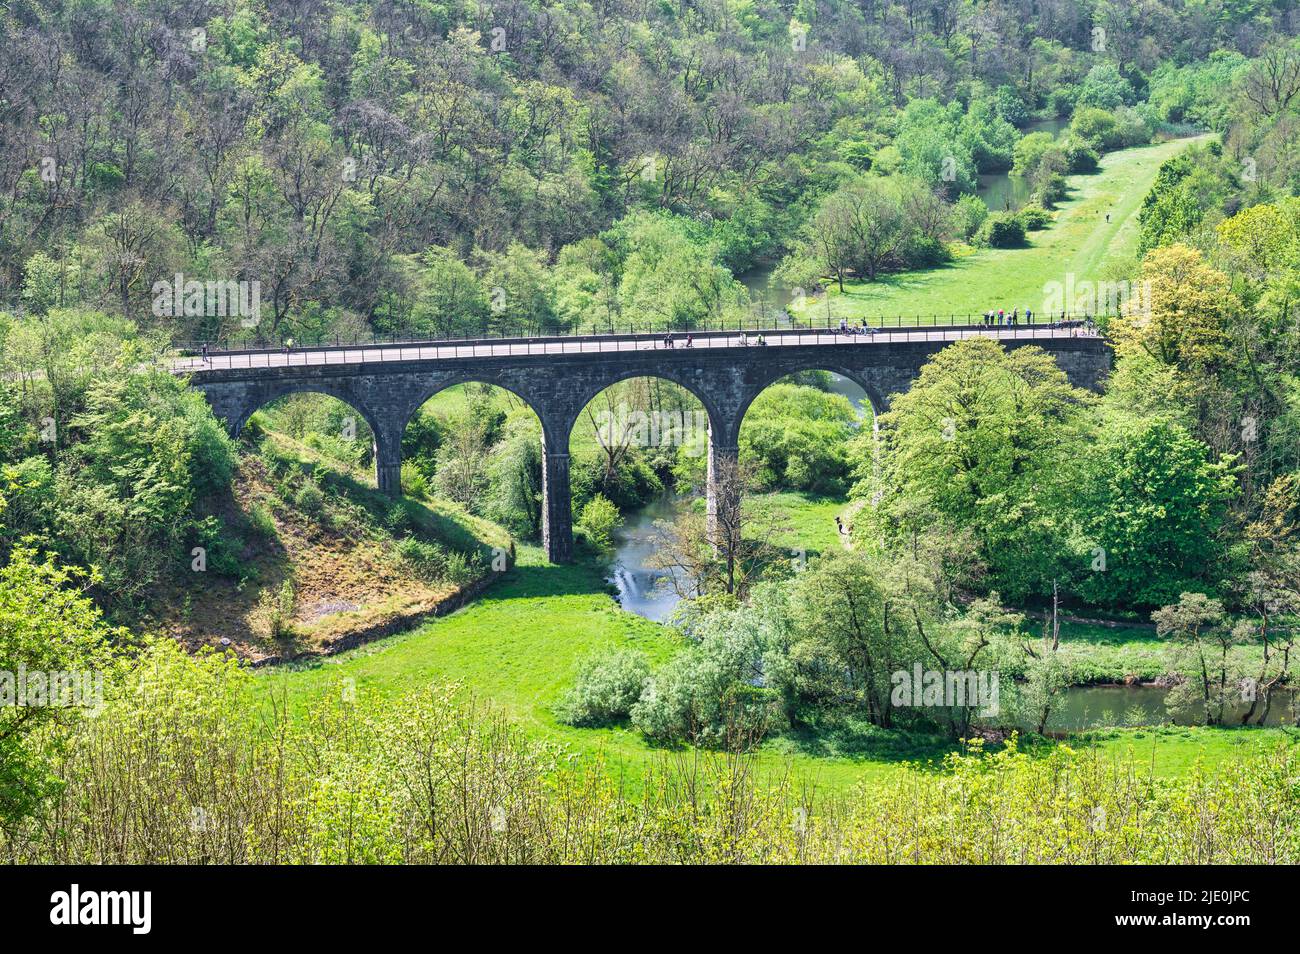 The Headstone Viaduct in the Peak District of England Stock Photo